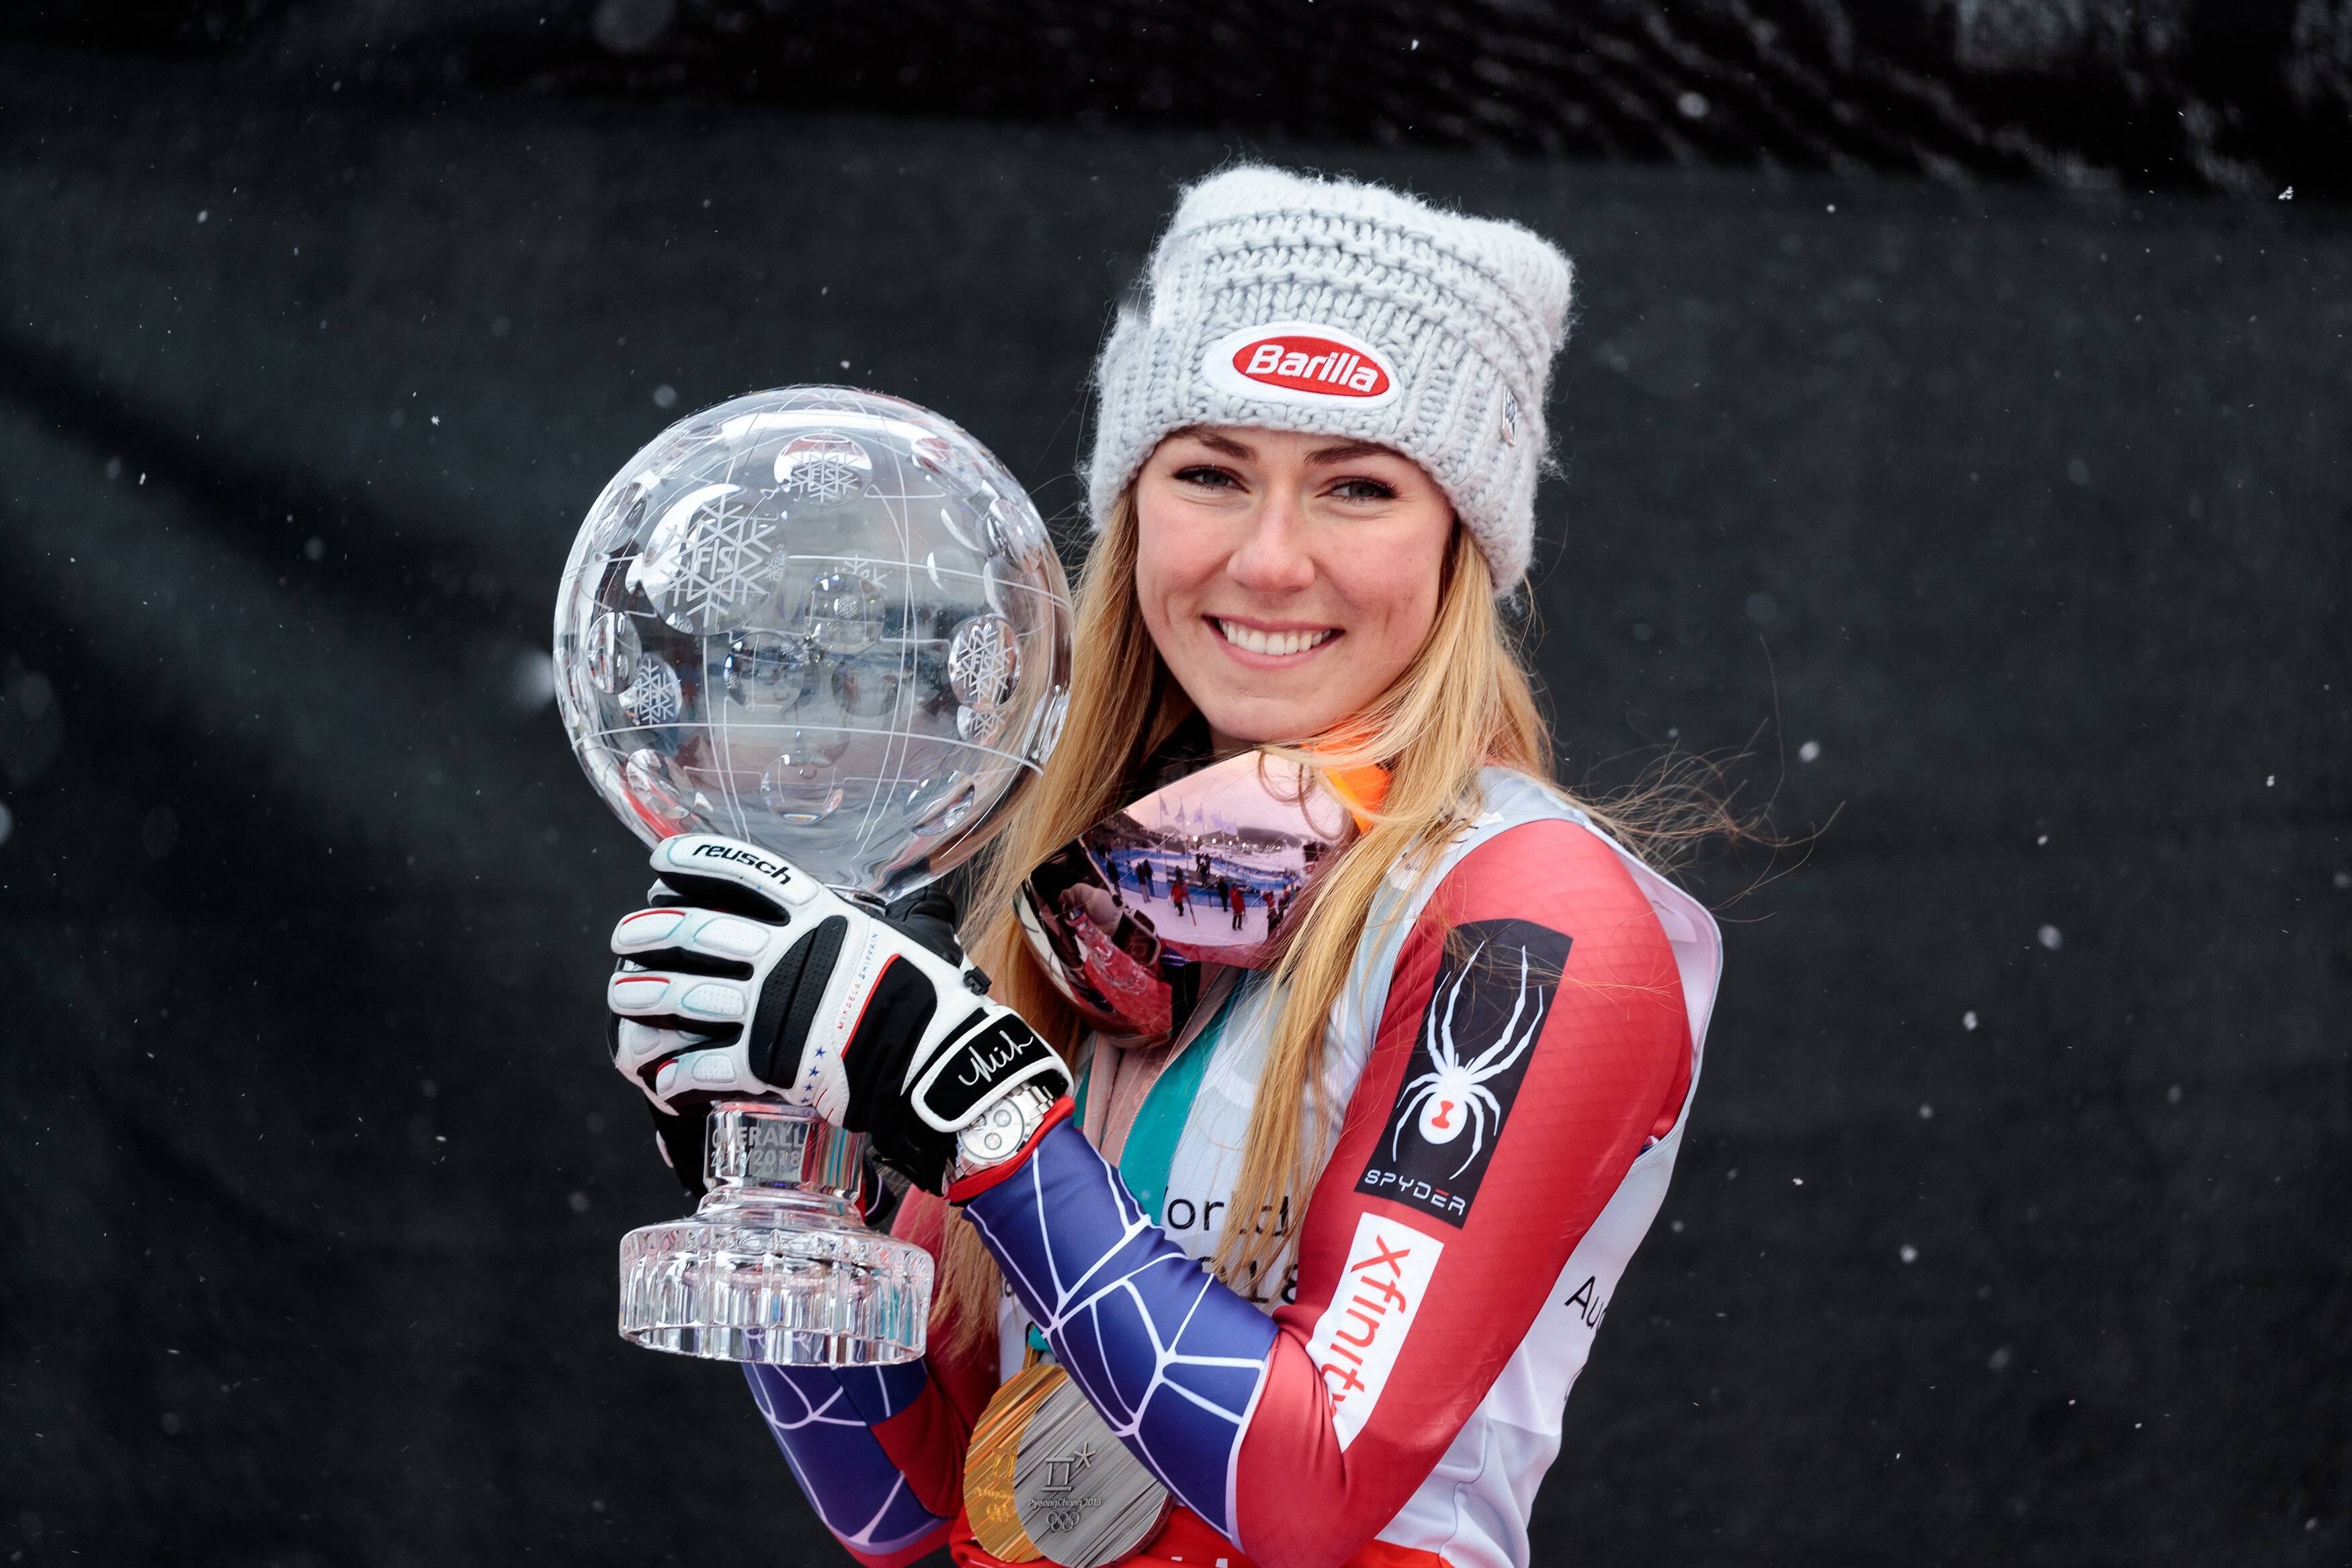 Mikaela shiffrin's profile, read the full biography, see the number of...